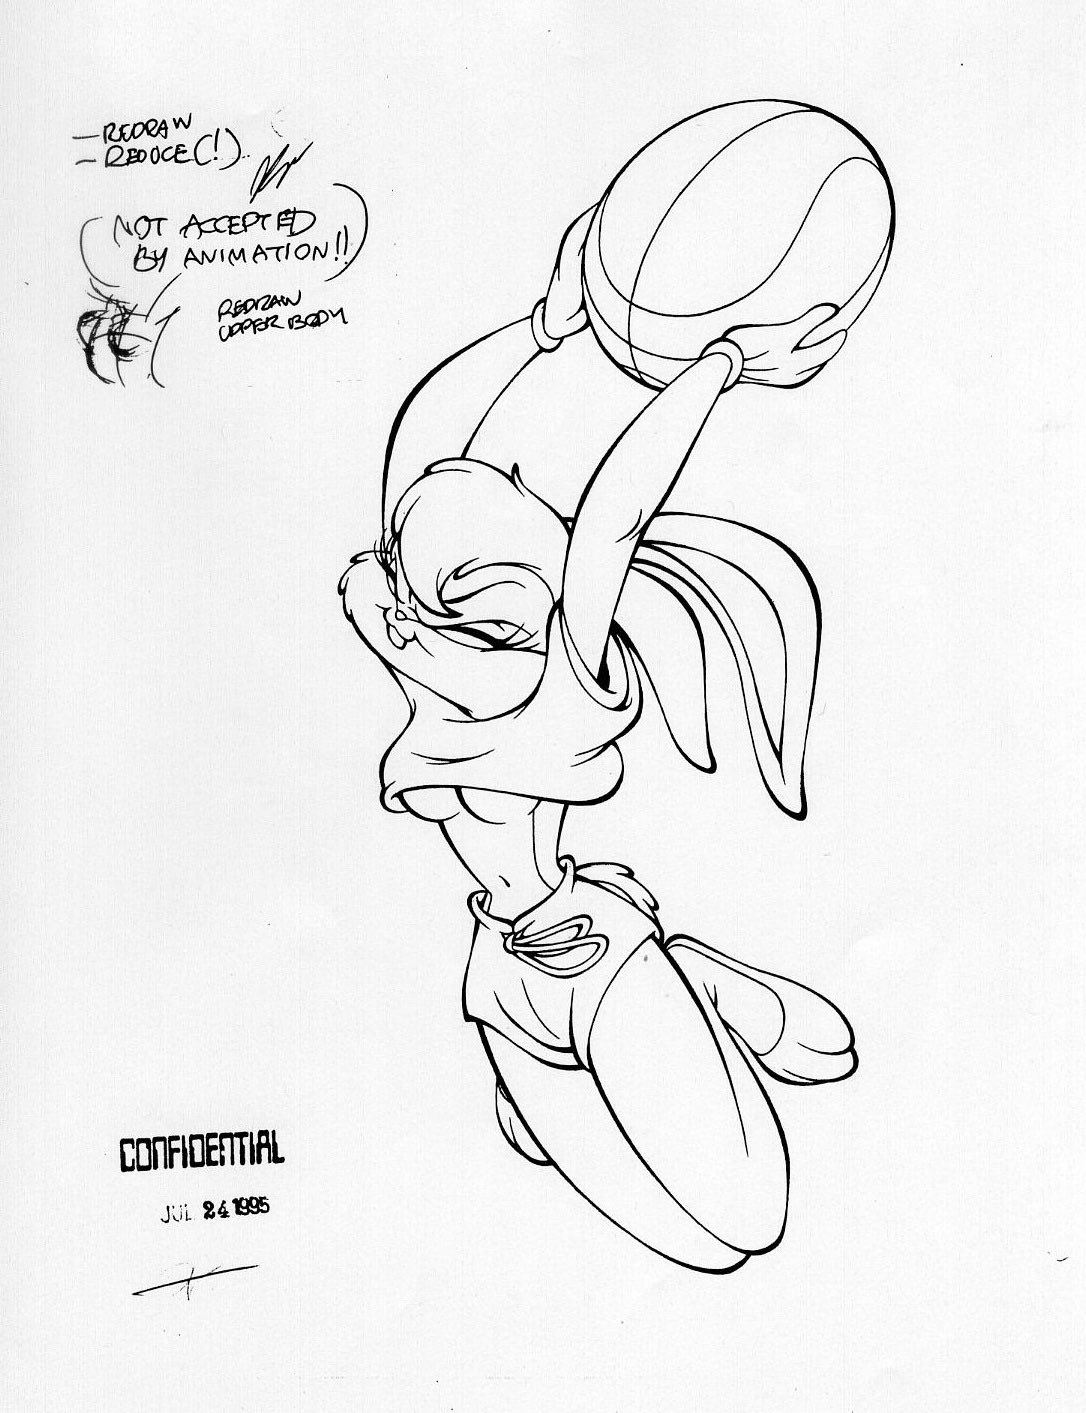 here’s a couple of model sheets of Lola Bunny from the original Space Jam m...